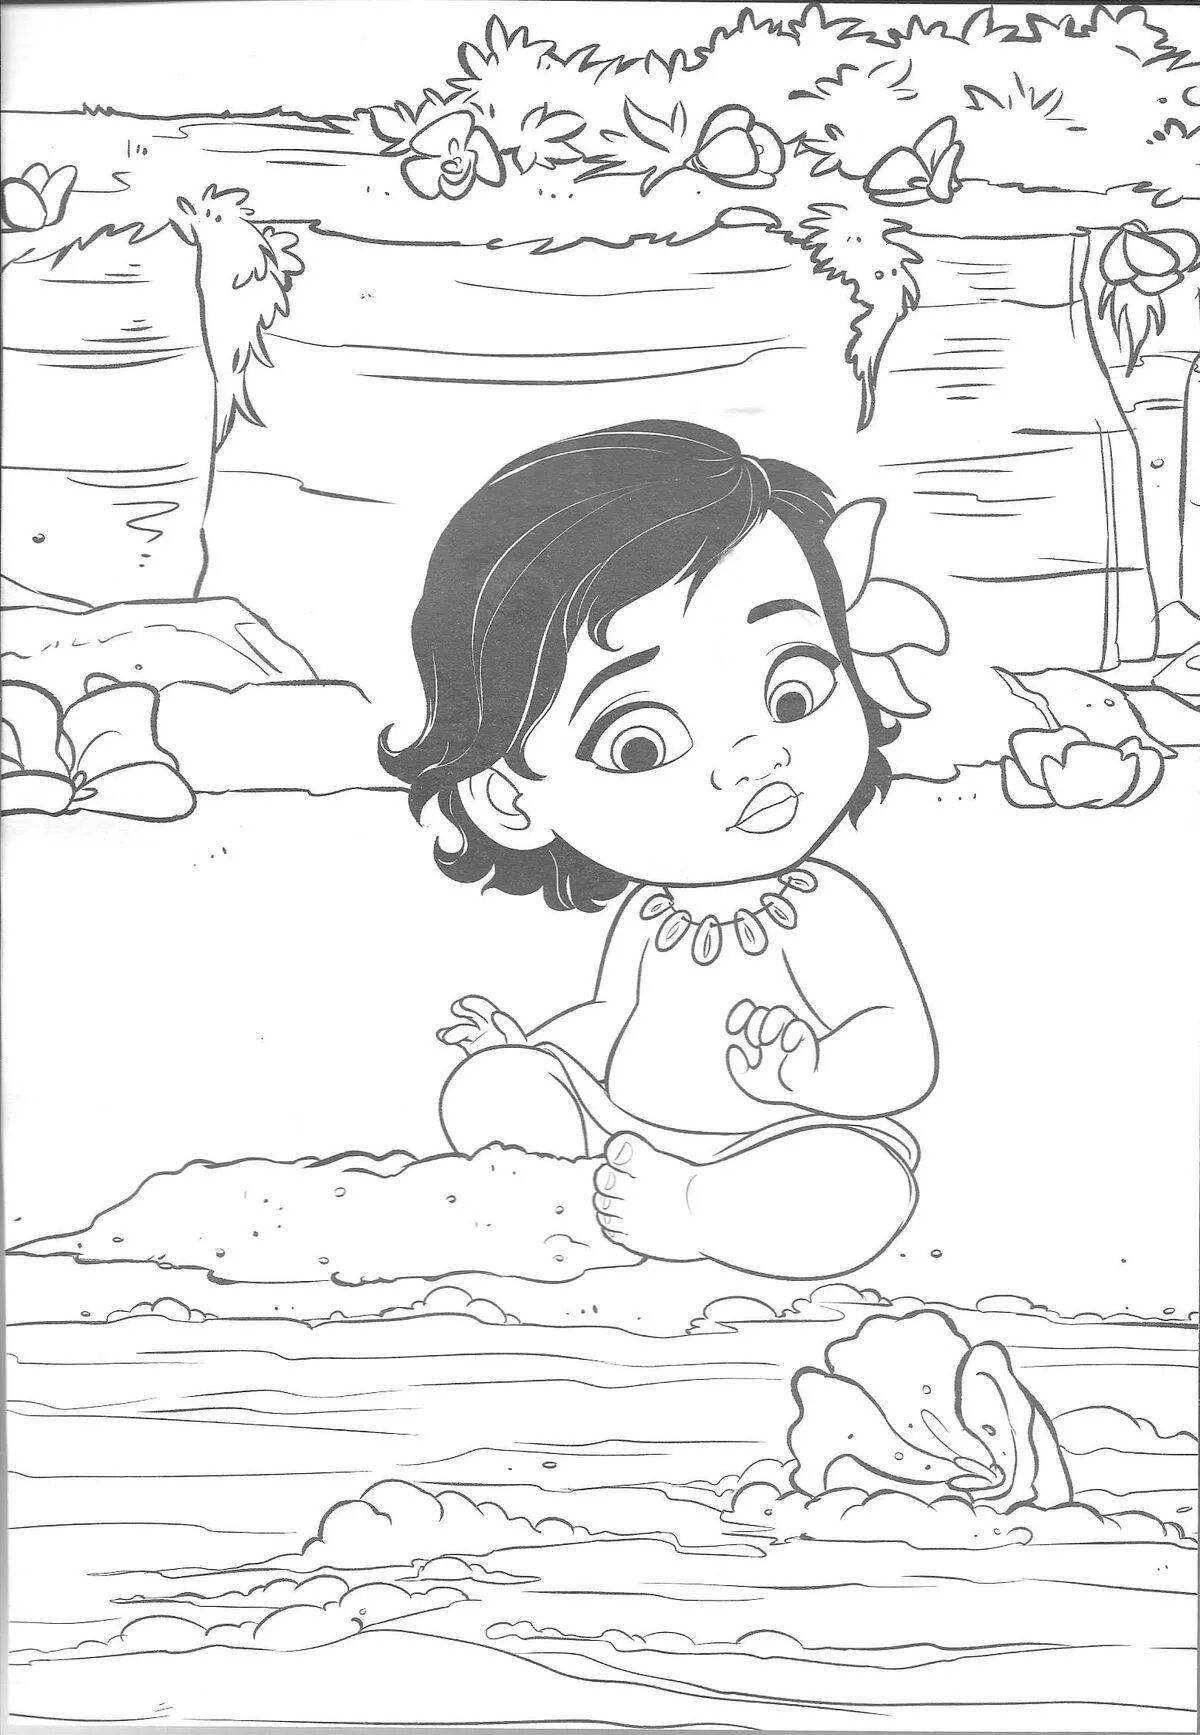 Exquisite moana coloring book for kids